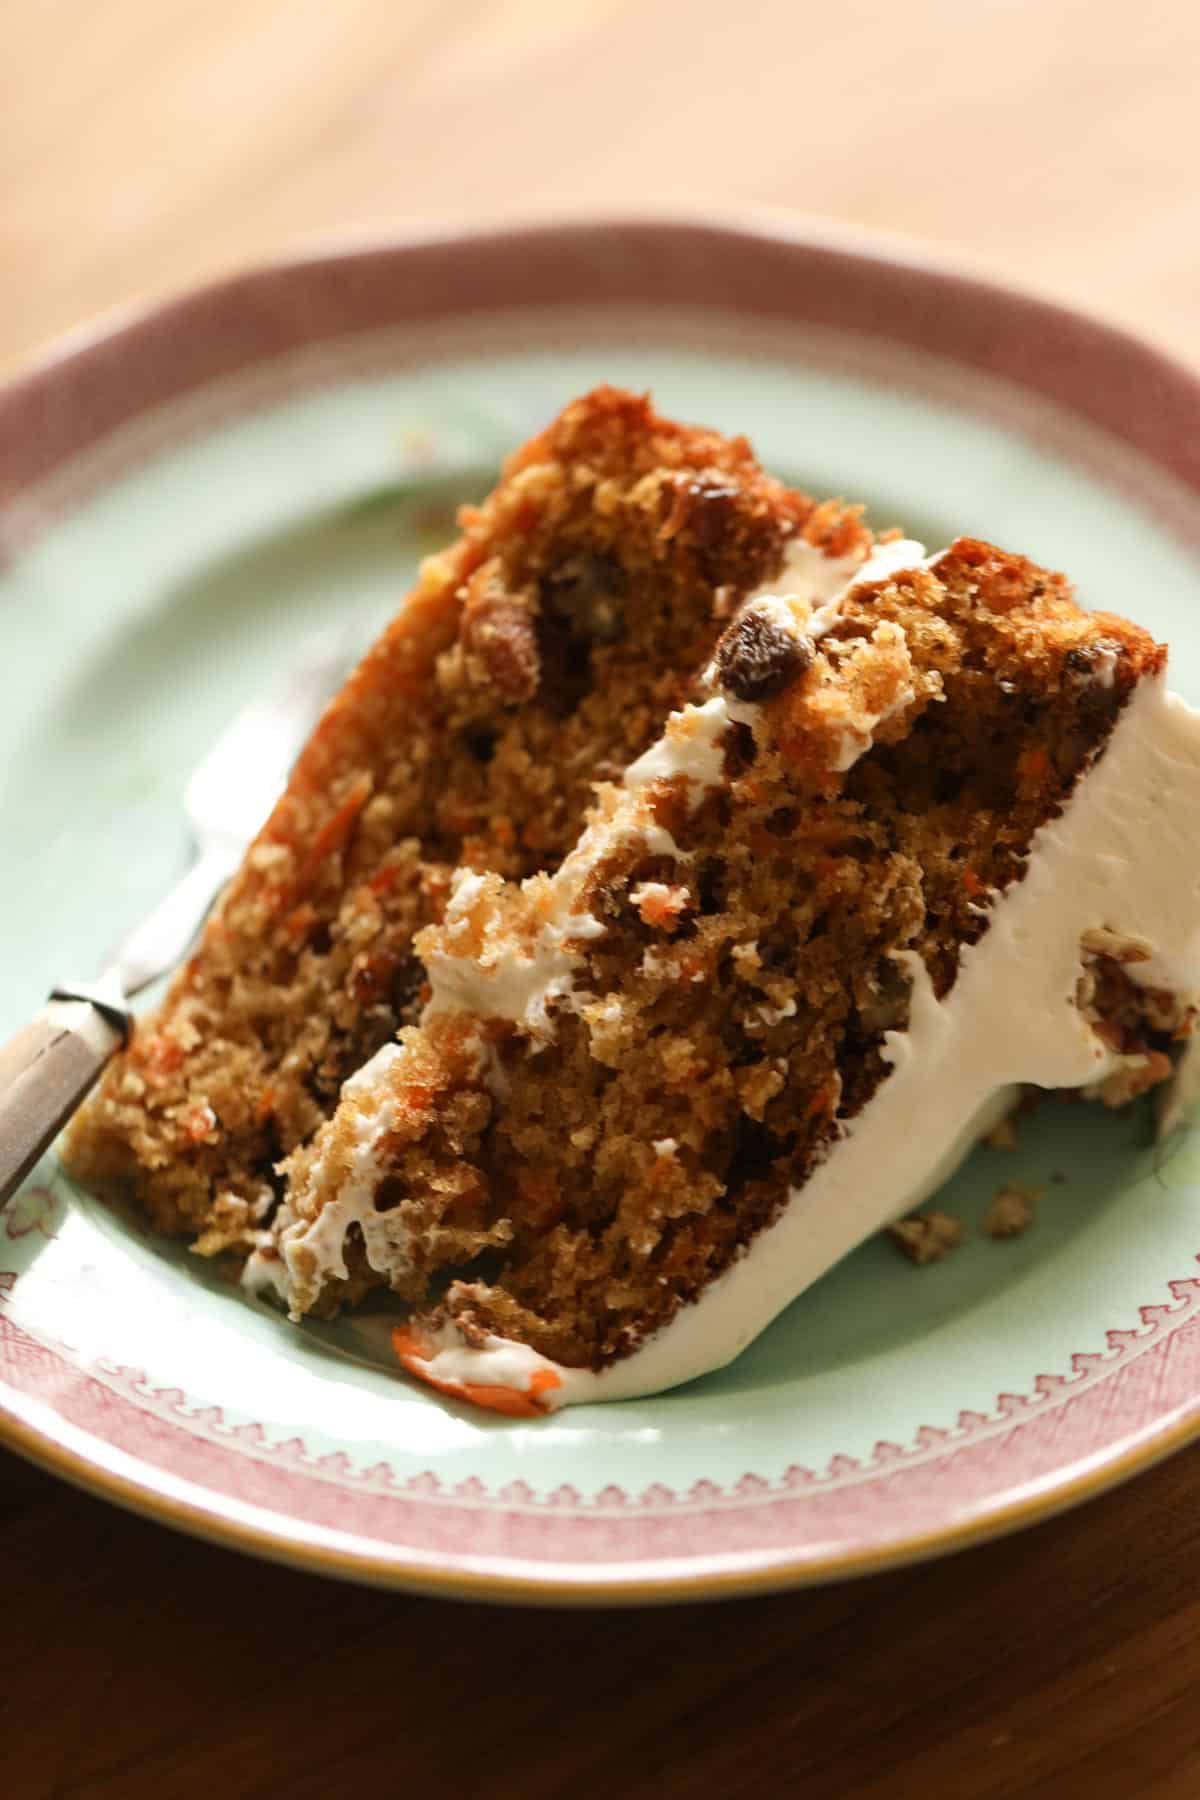 a slice of moist carrot cake with pineapple and raisins